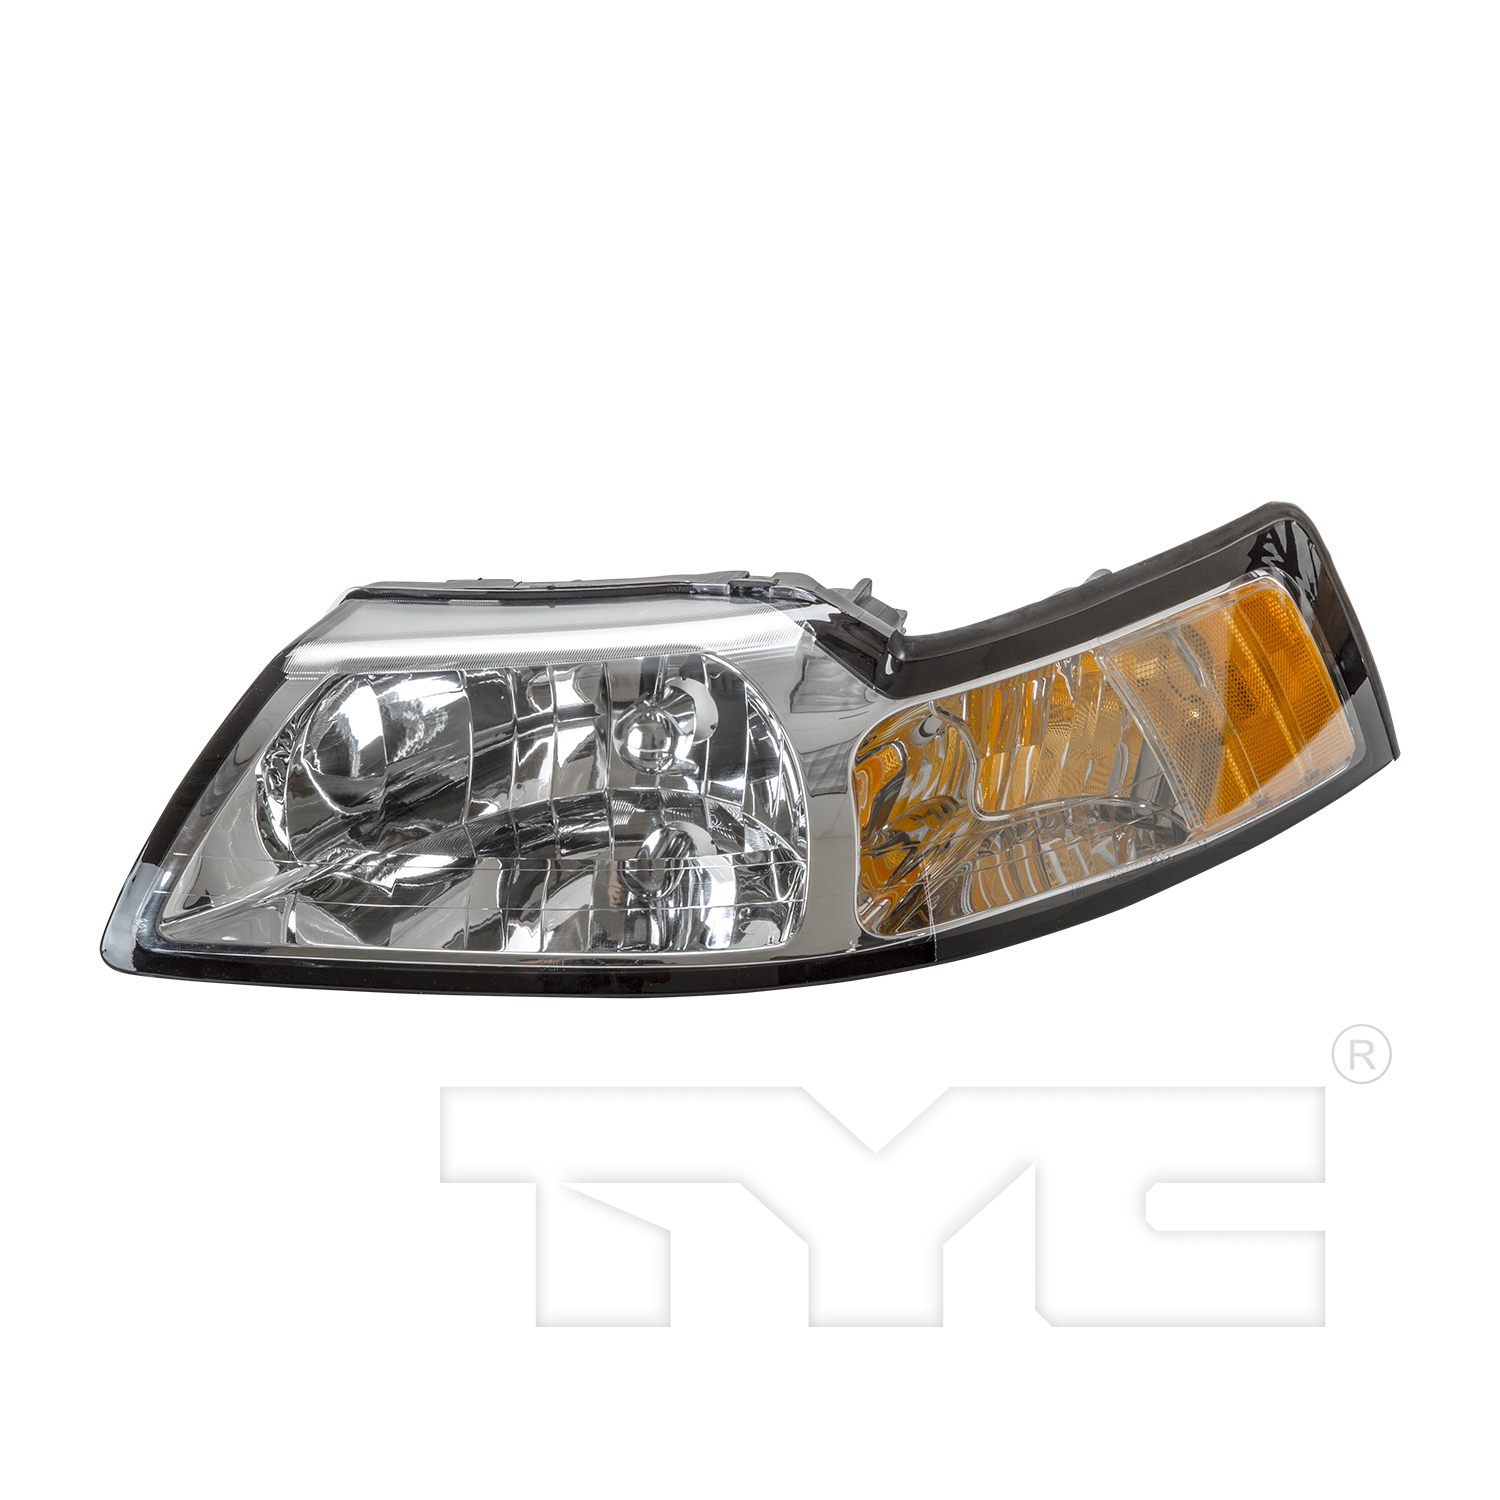 Aftermarket HEADLIGHTS for FORD - MUSTANG, MUSTANG,99-00,LT Headlamp assy composite